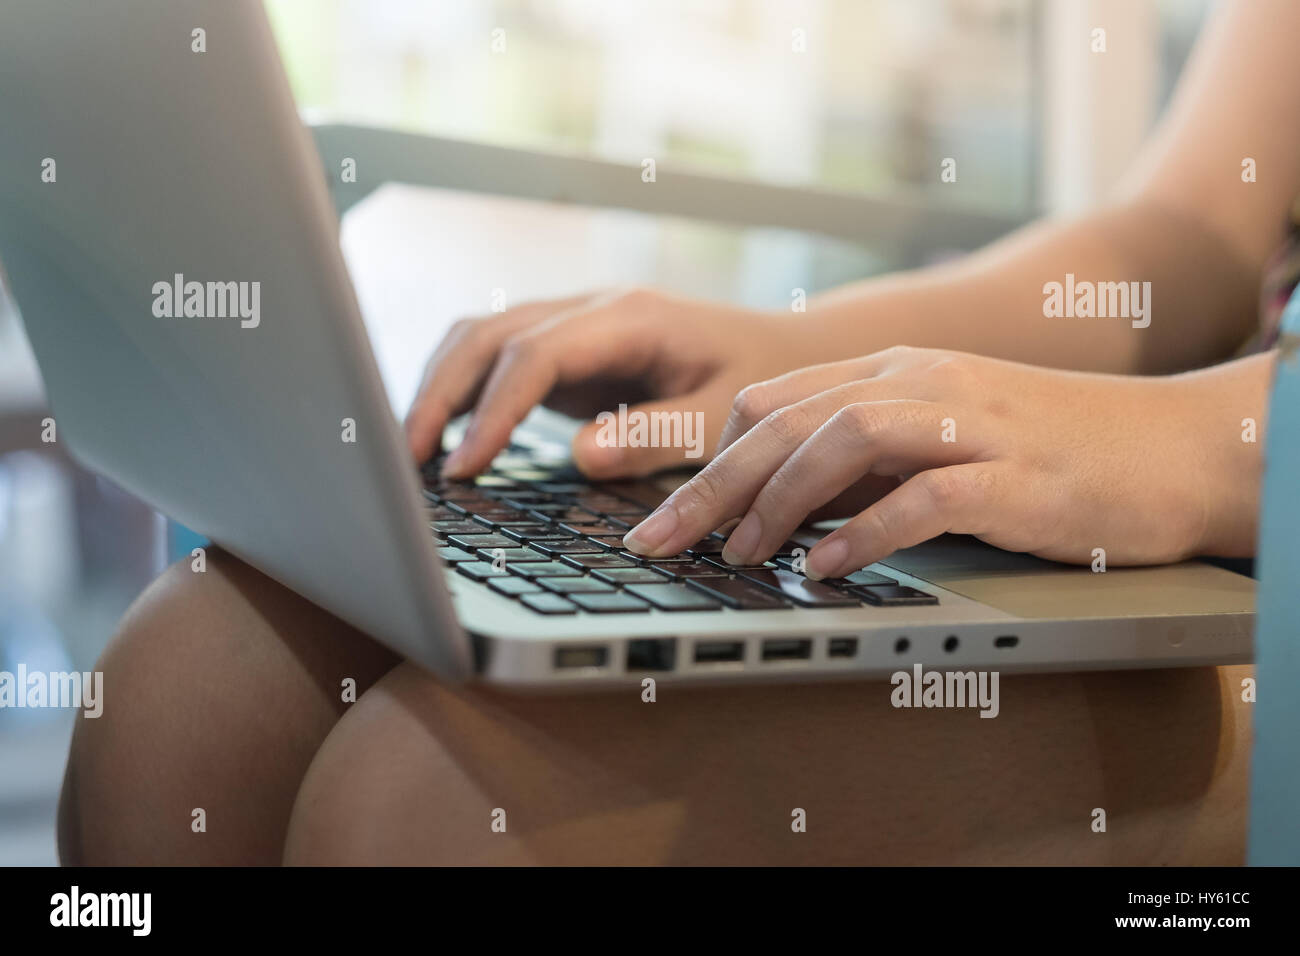 Woman hand typing on laptop computer keyboard for online business. work from anywhere concept Stock Photo